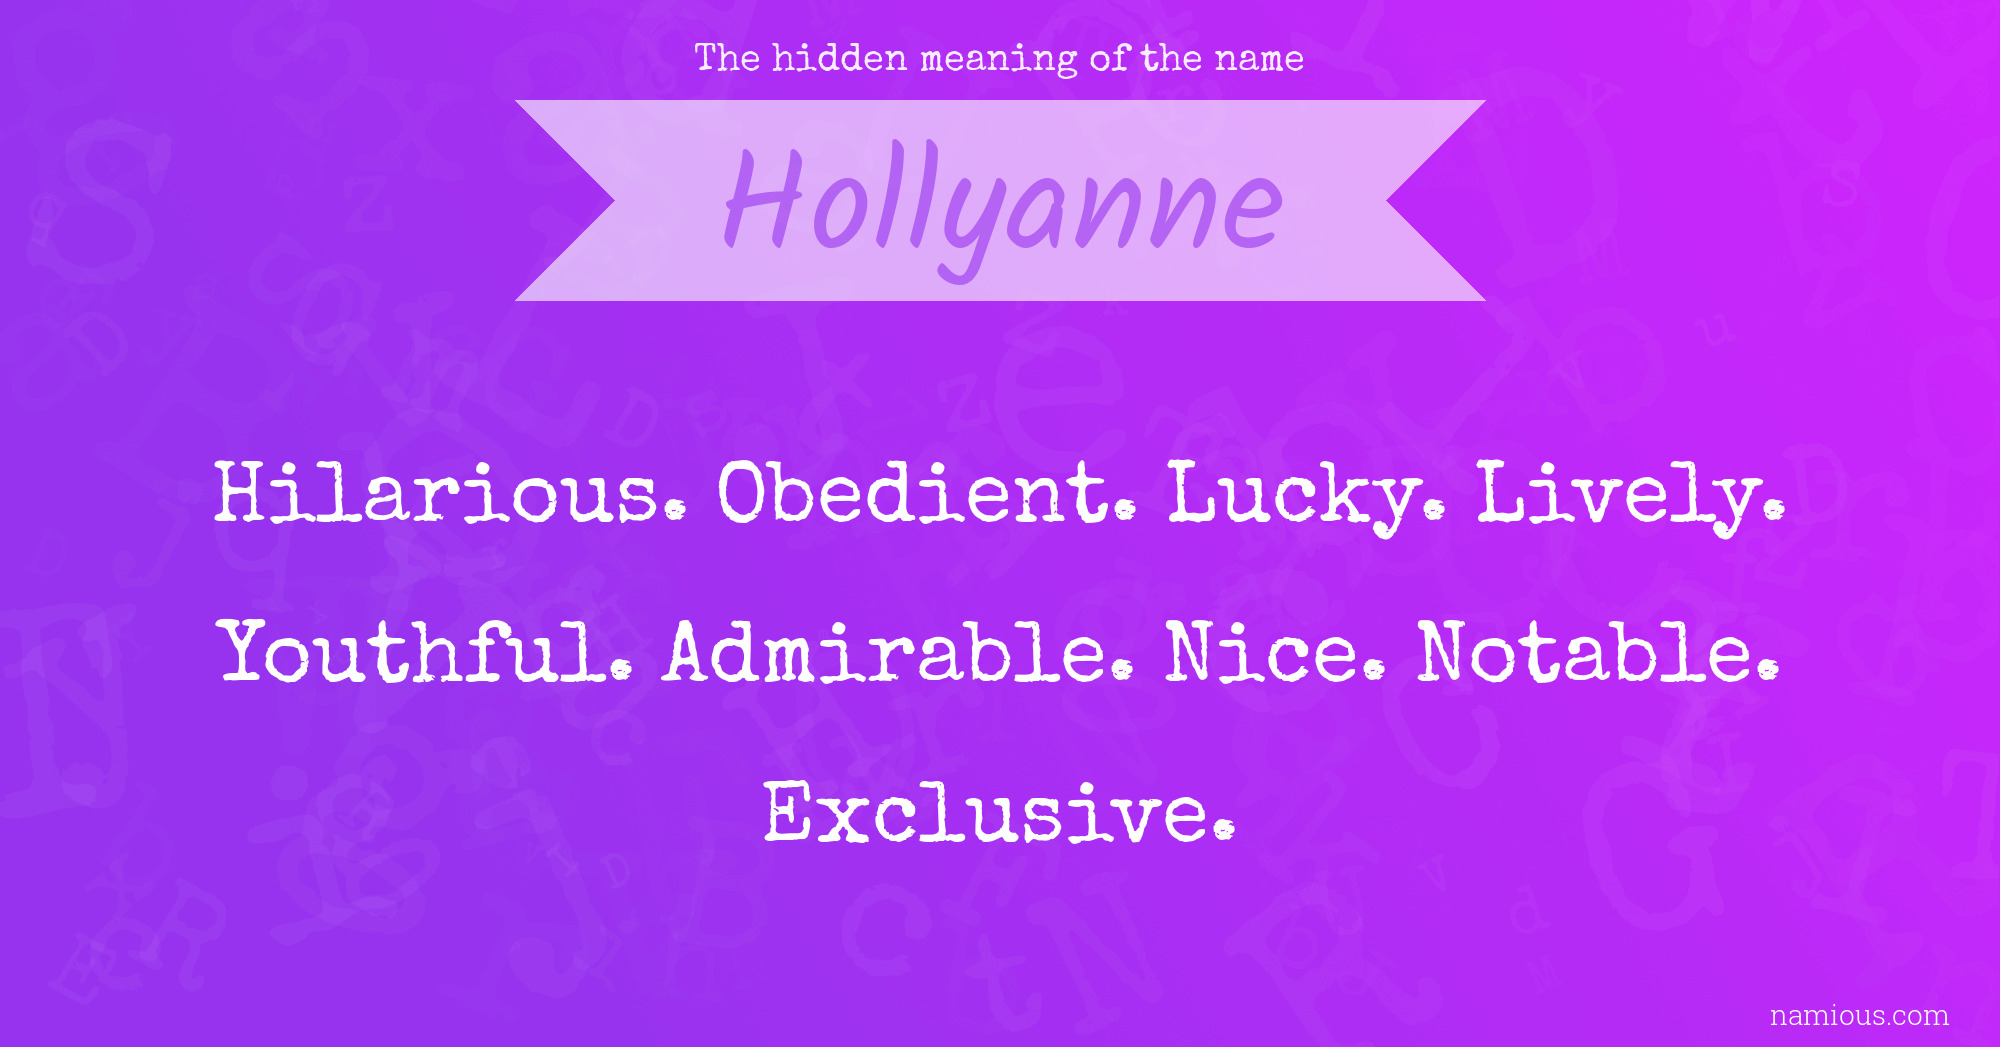 The hidden meaning of the name Hollyanne